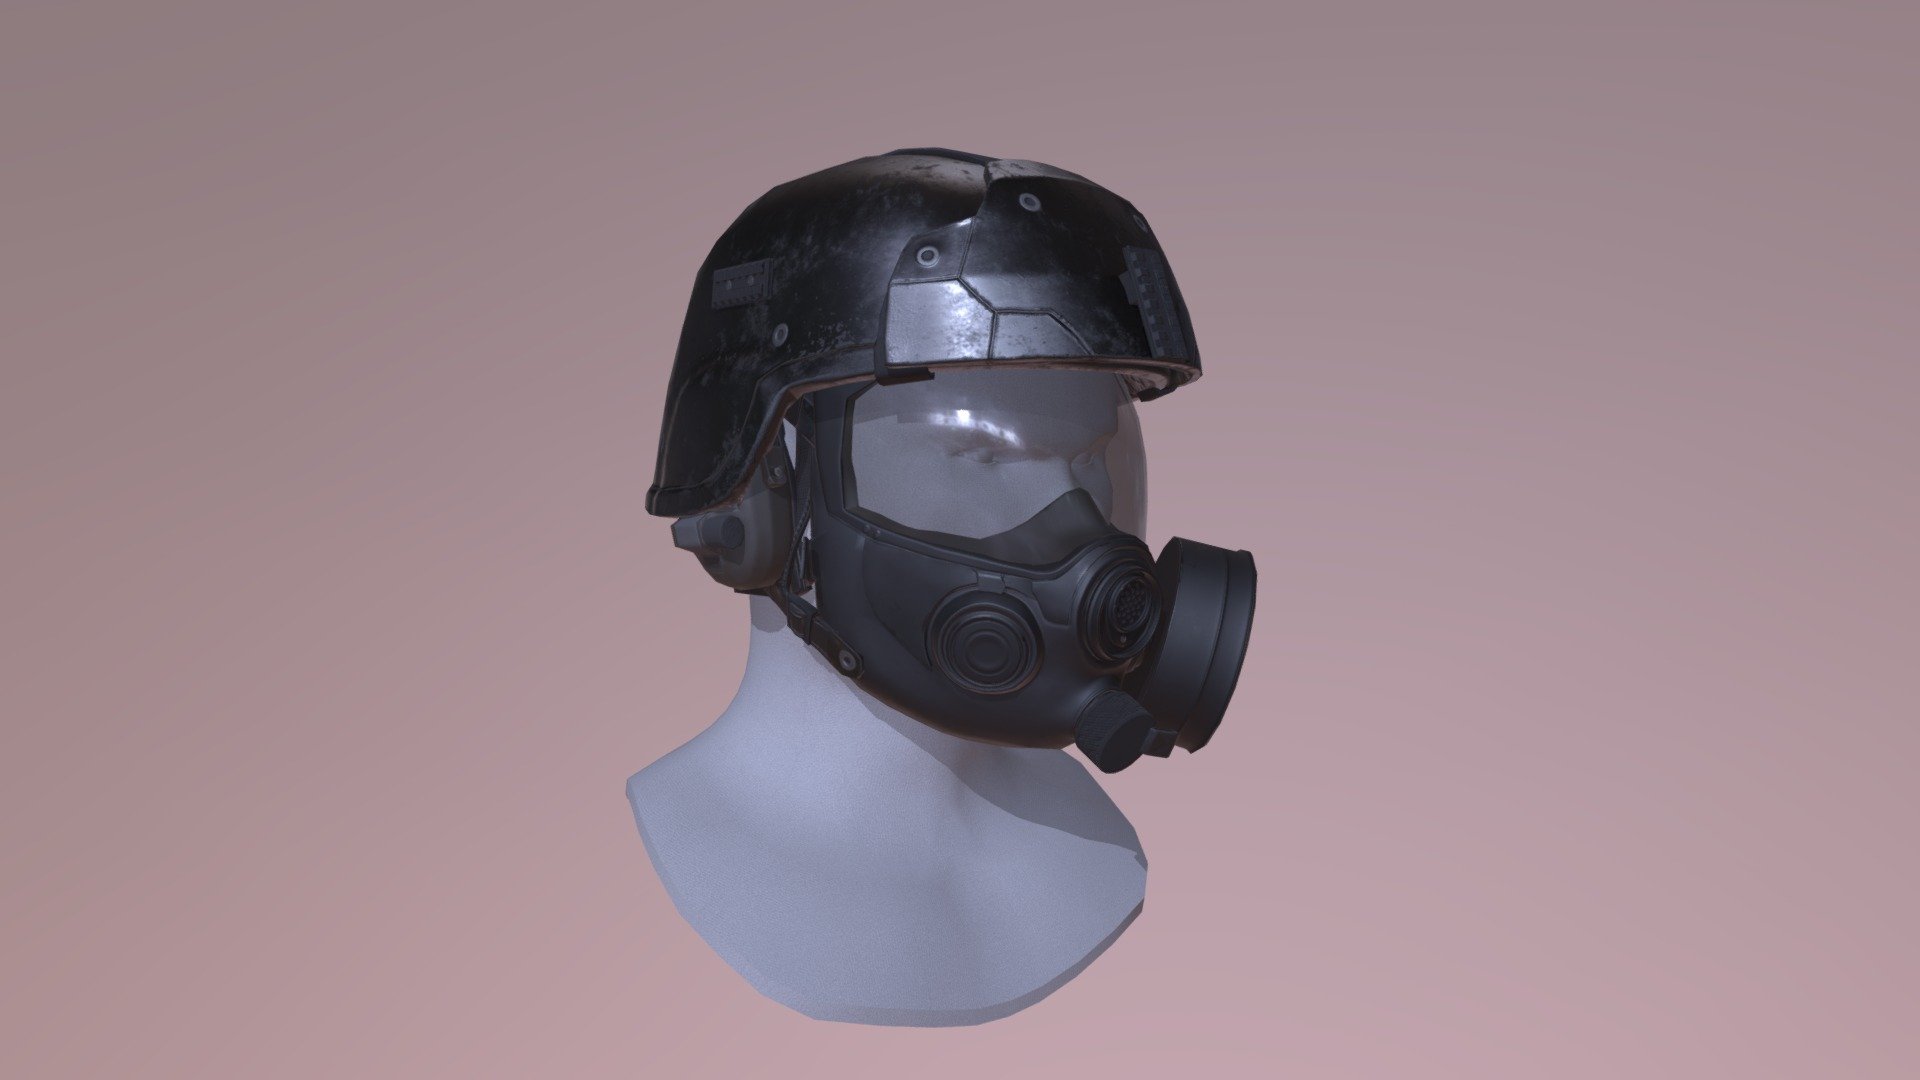 I wanted to make something more conventional and different from my past projects, so I decided to model a gasmask. Which then expanded to modelling a reinforced helmet and then finally active hearing protection. I also wanted to do skin weights and import assets into a game, since its fun to see models &ldquo;alive